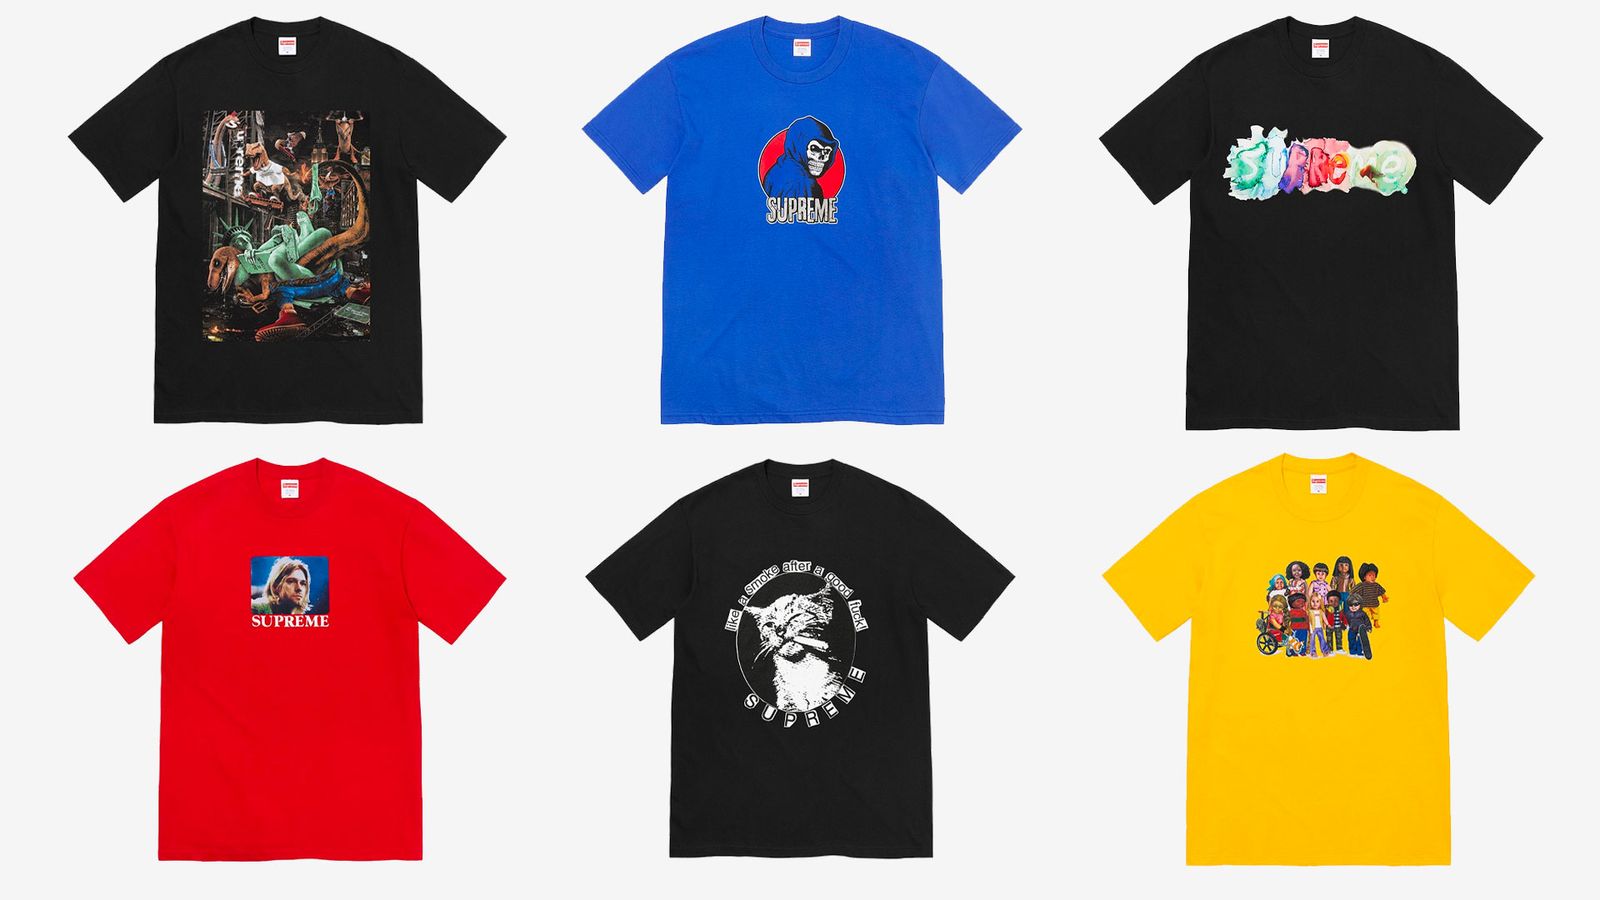 Supreme Spring/Summer 2023 collection - A selection of tees in black, blue, red, and yellow.